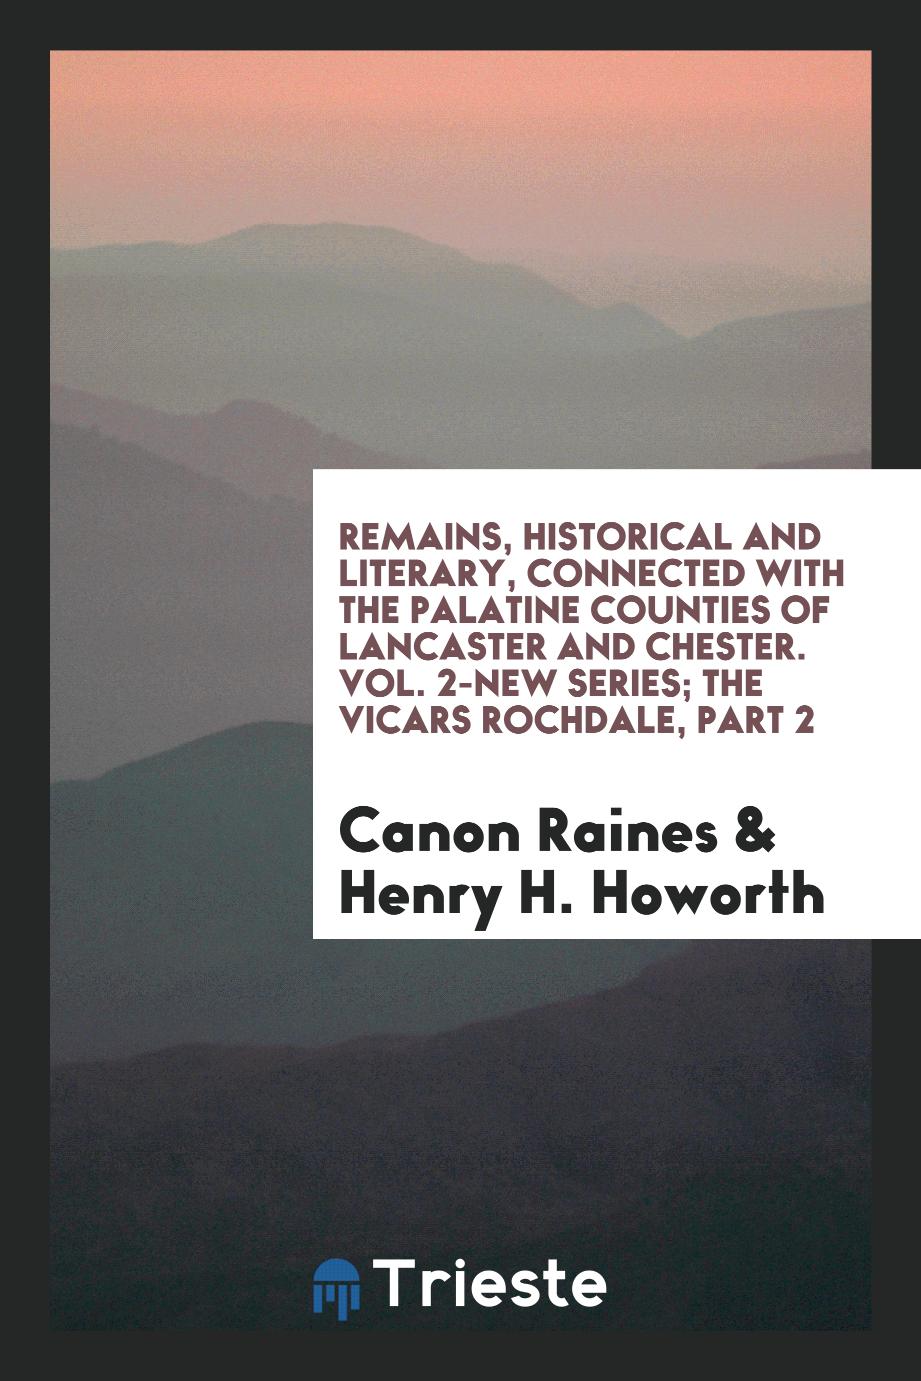 Remains, Historical and Literary, Connected with the Palatine Counties of Lancaster and Chester. Vol. 2-New Series; The Vicars Rochdale, Part 2